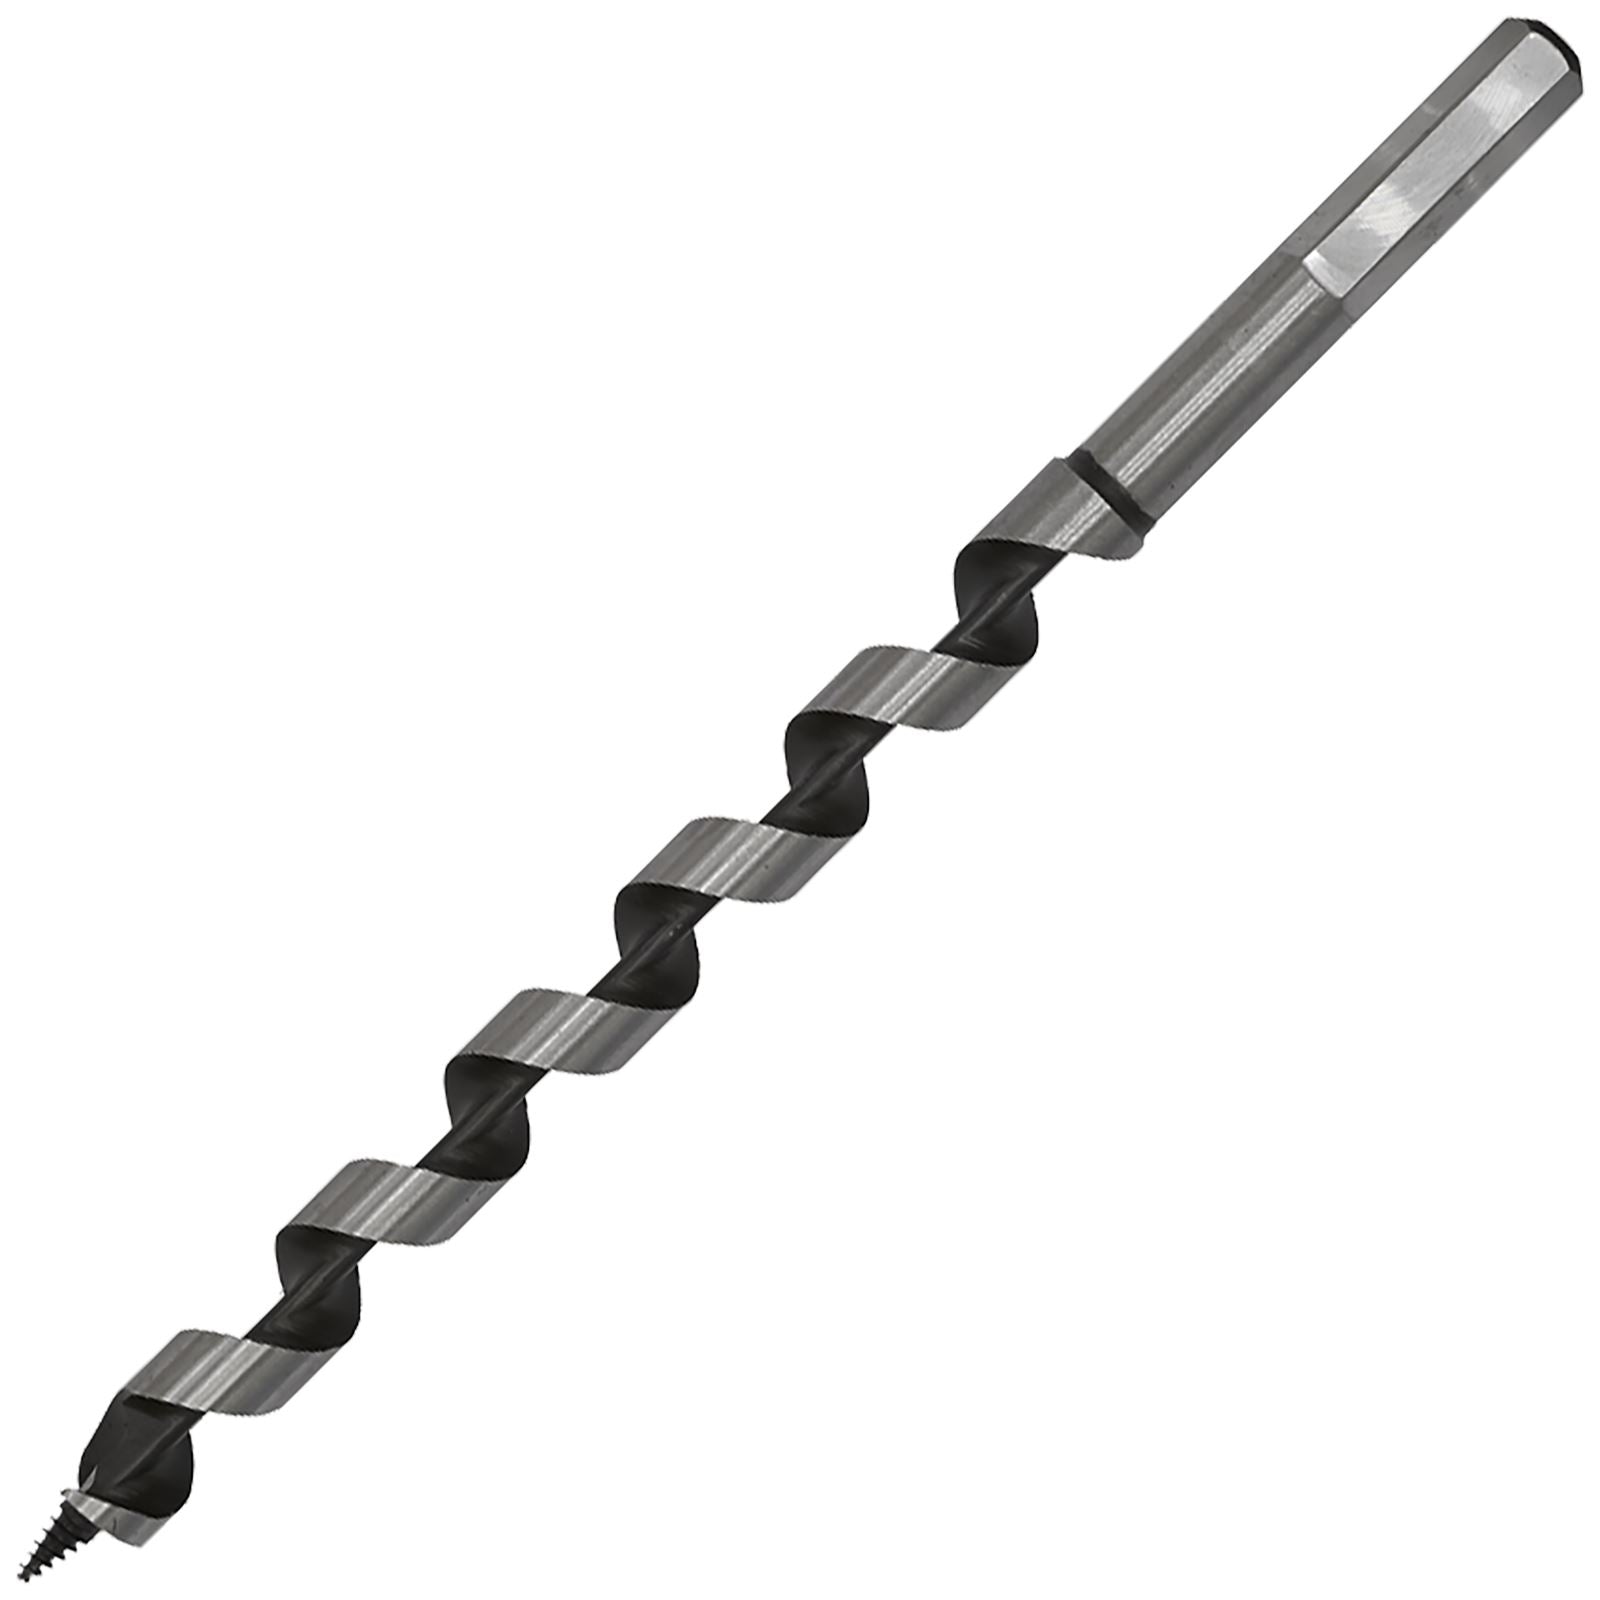 Worksafe by Sealey Auger Wood Drill Bit 14mm x 235mm